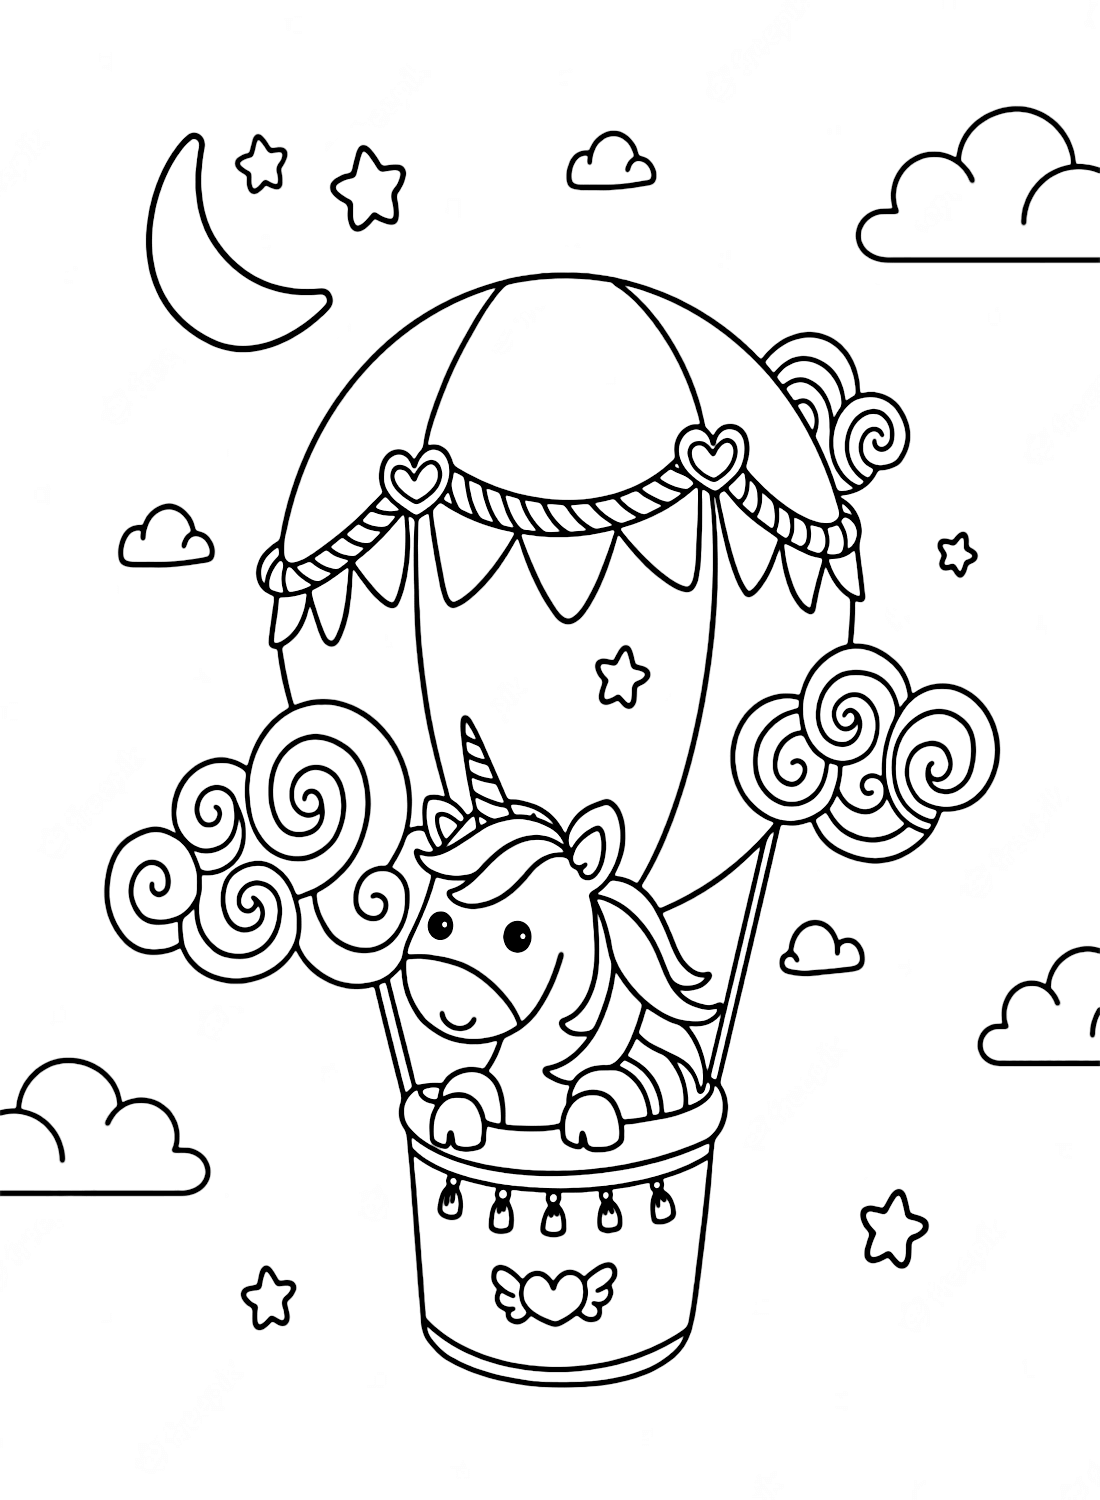 42 Free Printable Crayola Coloring Pages